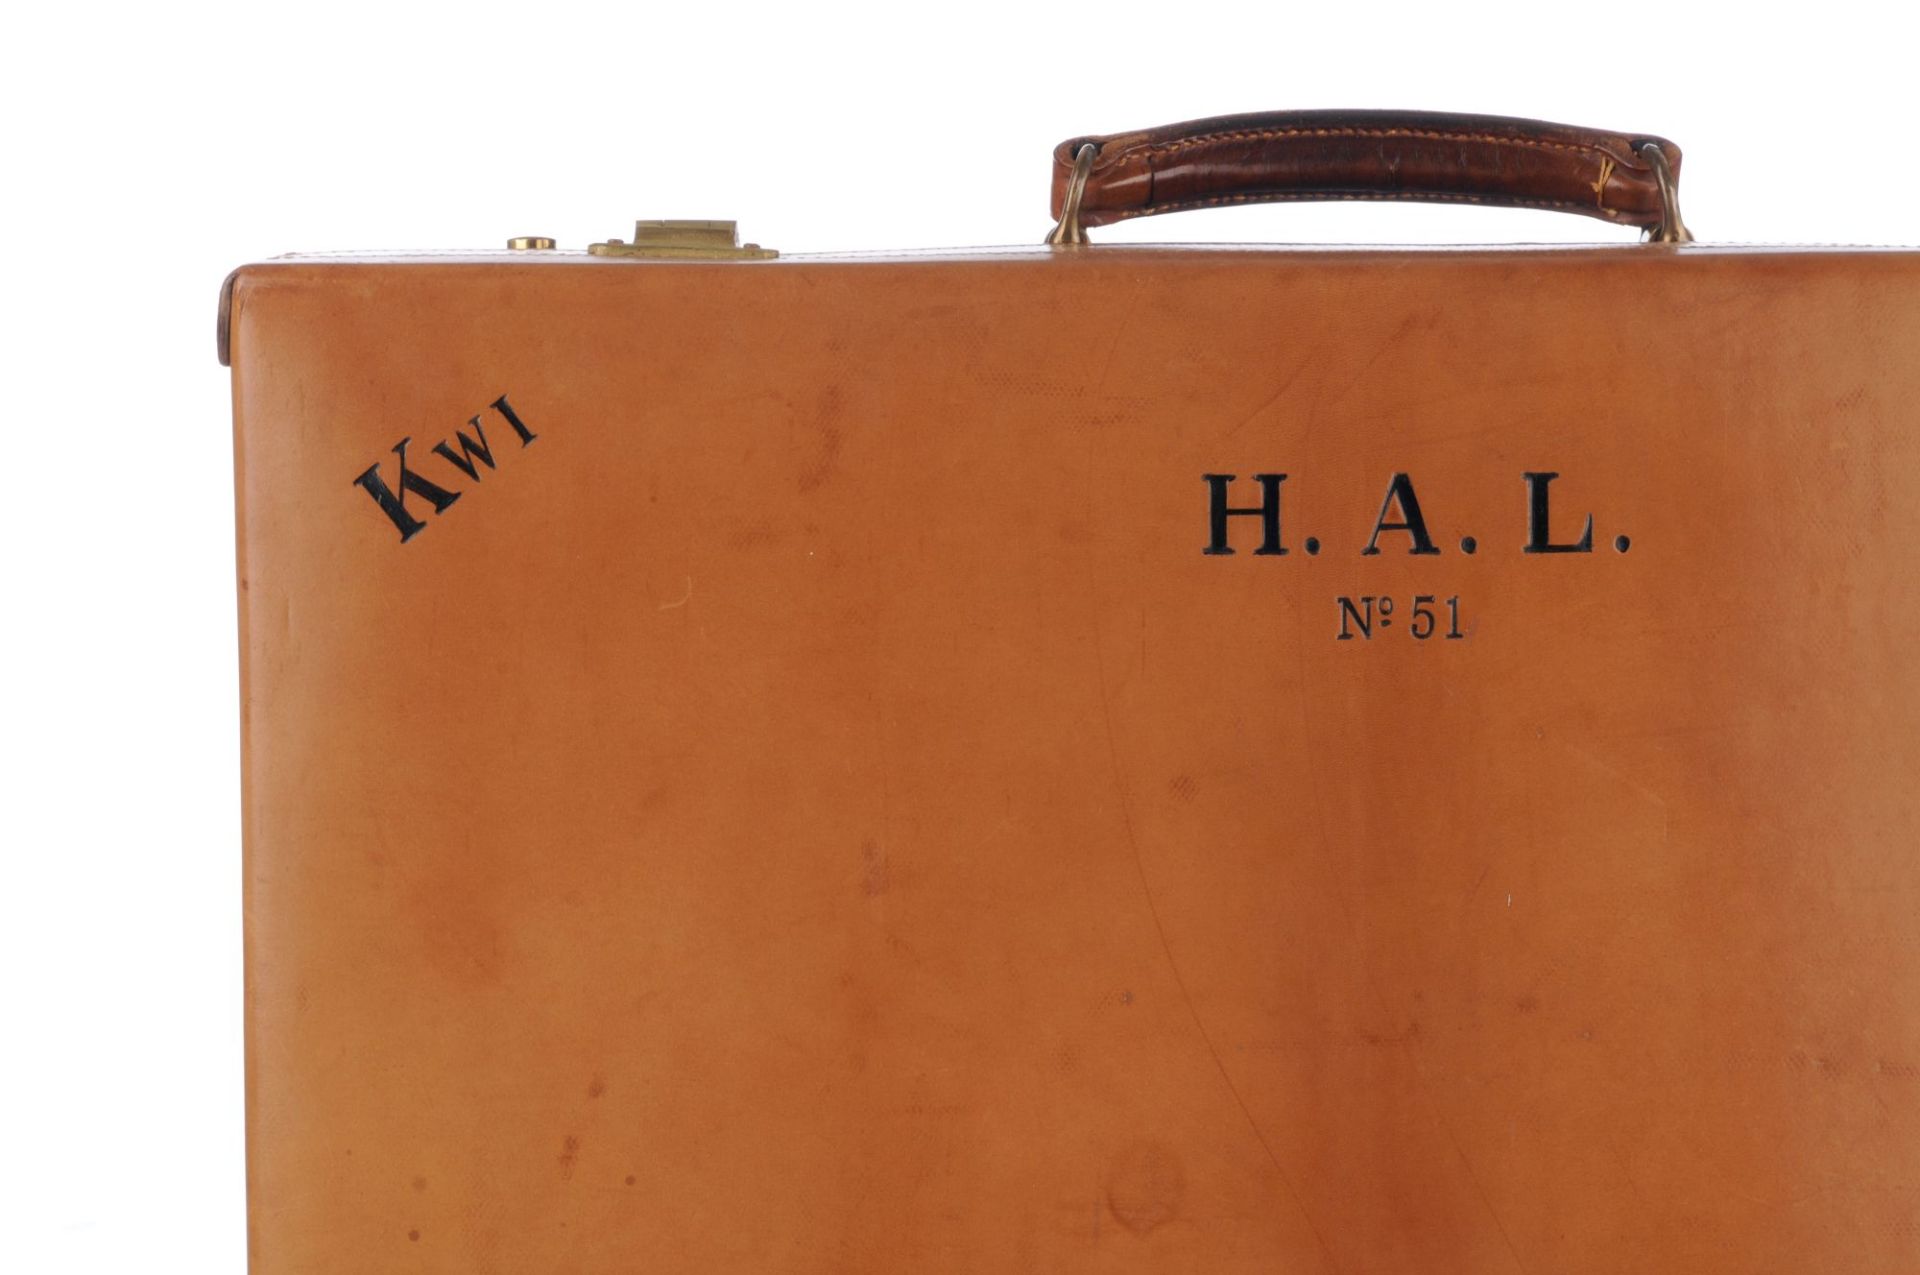 Koffer "H.A.L. No 51". Wohl Lansdowne Luggage London. Um 1930. - Image 3 of 3